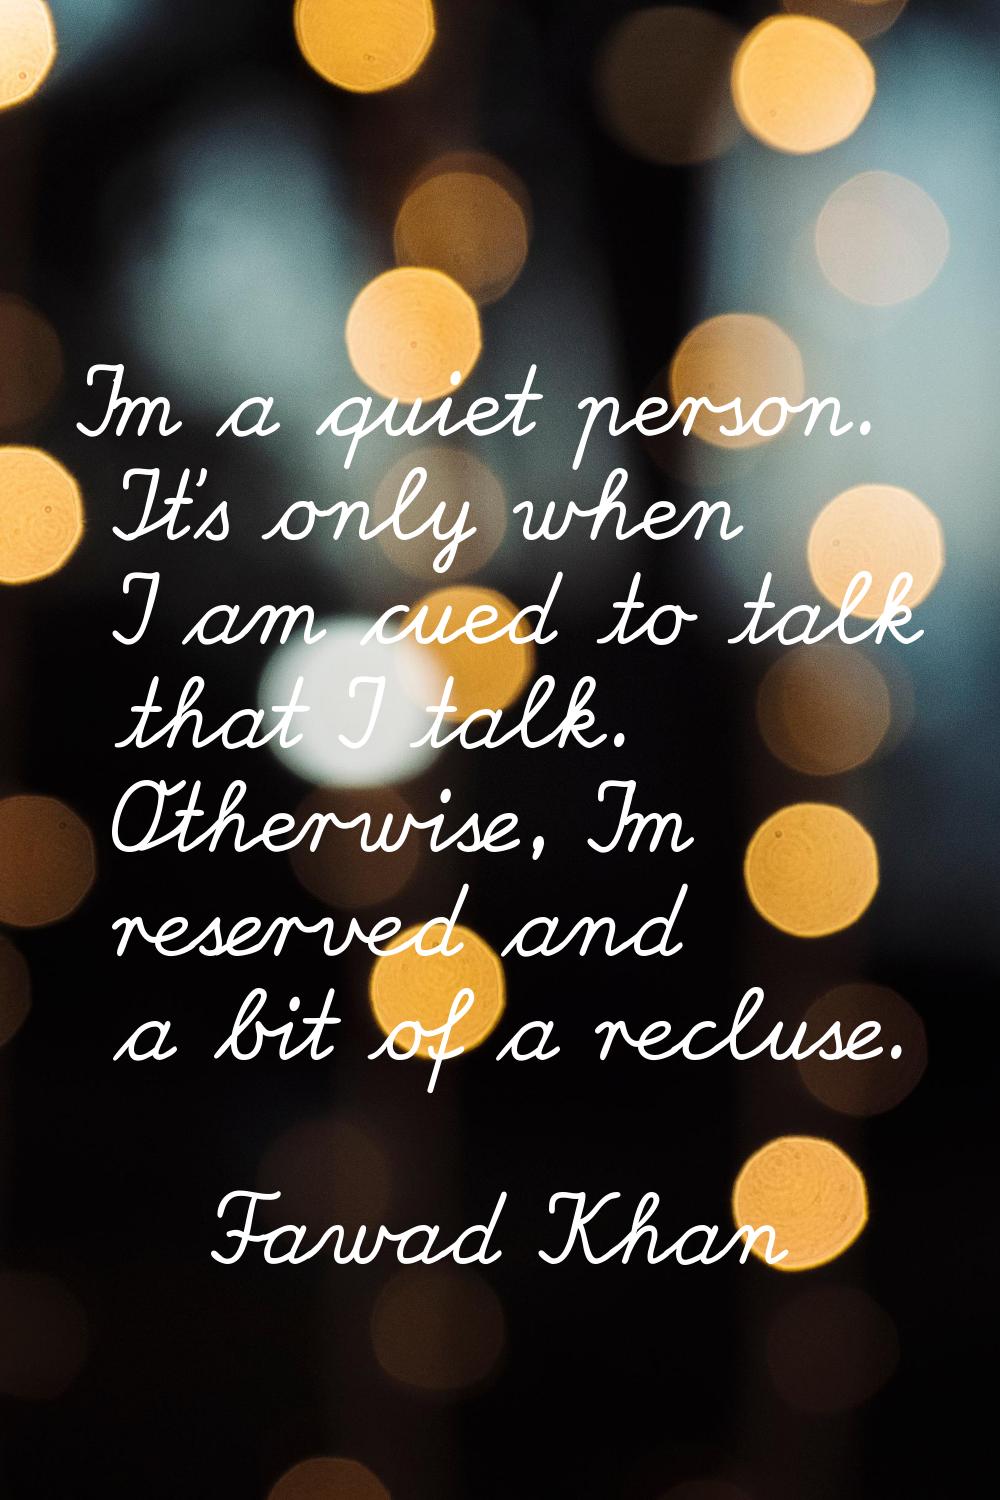 I'm a quiet person. It's only when I am cued to talk that I talk. Otherwise, I'm reserved and a bit